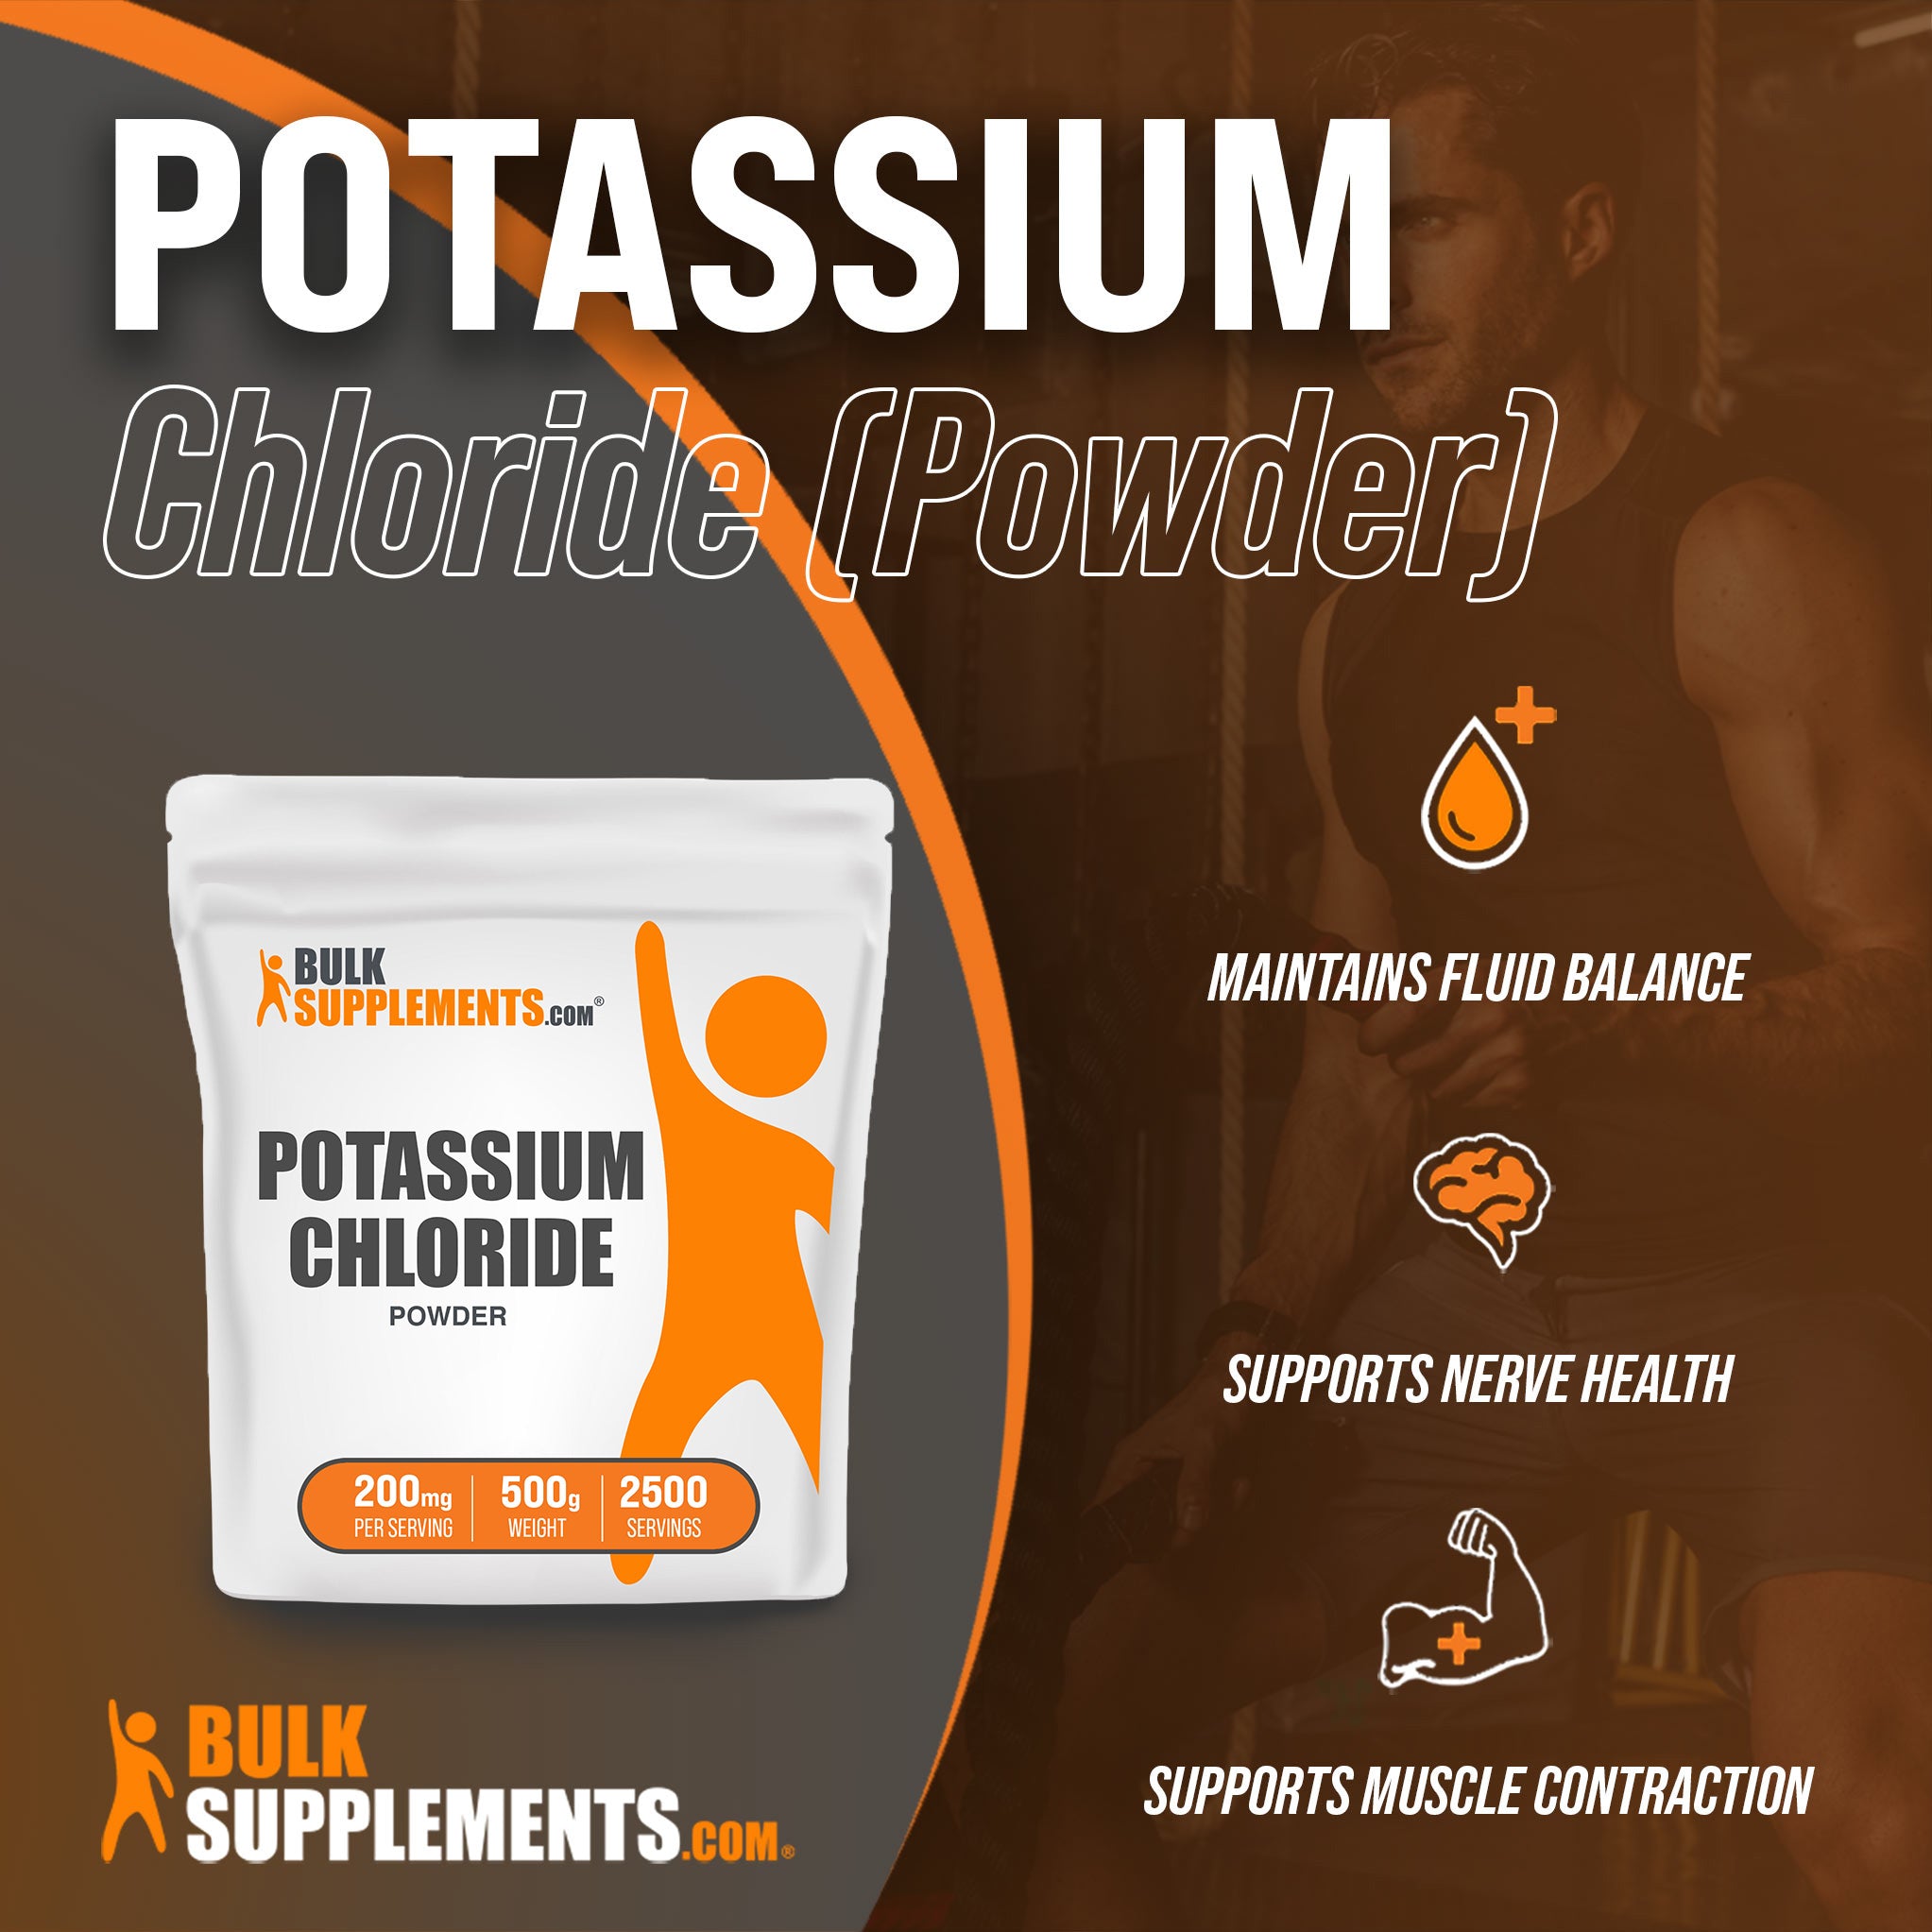 Benefits of Potassium Chloride: maintains fluid balance, supports nerve health, supports muscle contraction